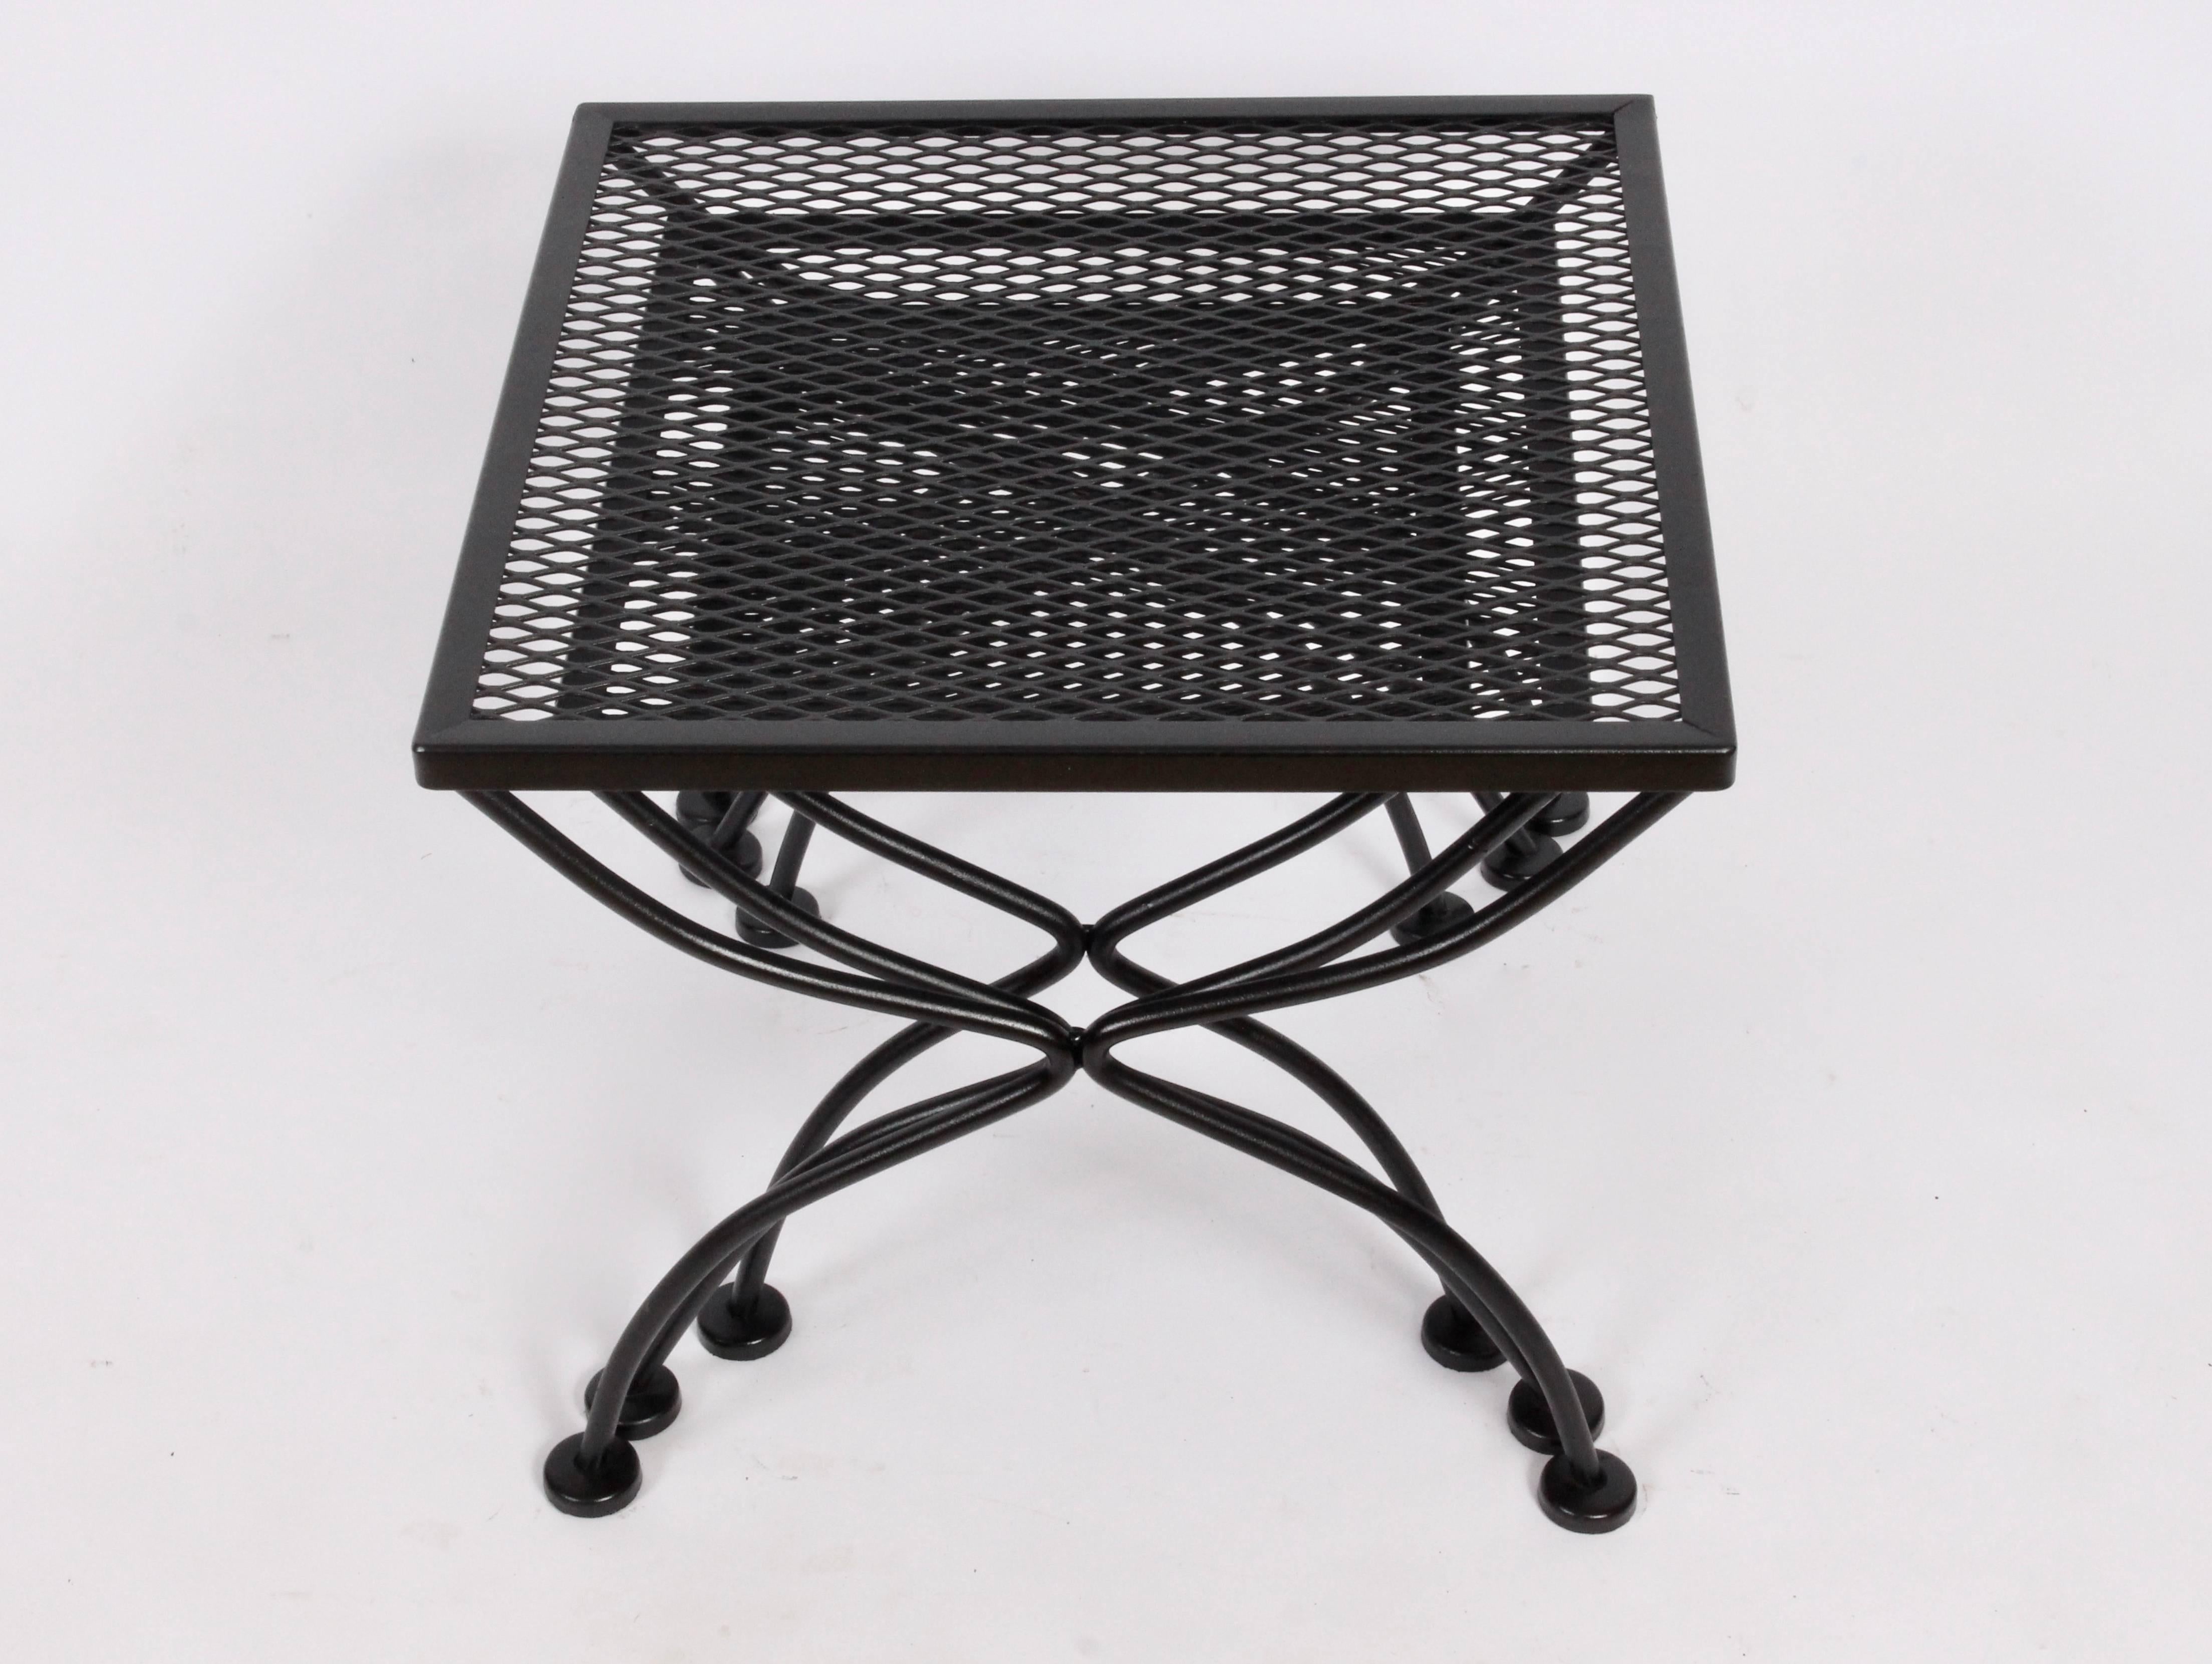 American midcentury black enamel wrought iron nesting tables by Russell Woodard. Rectangular painted wrought iron framework with expanded Mesh surface. Suitable for outdoor use. (Medium table 17 H x 12.5 D x 15 W) (Small table 16 H x 12.5 D x 12.5